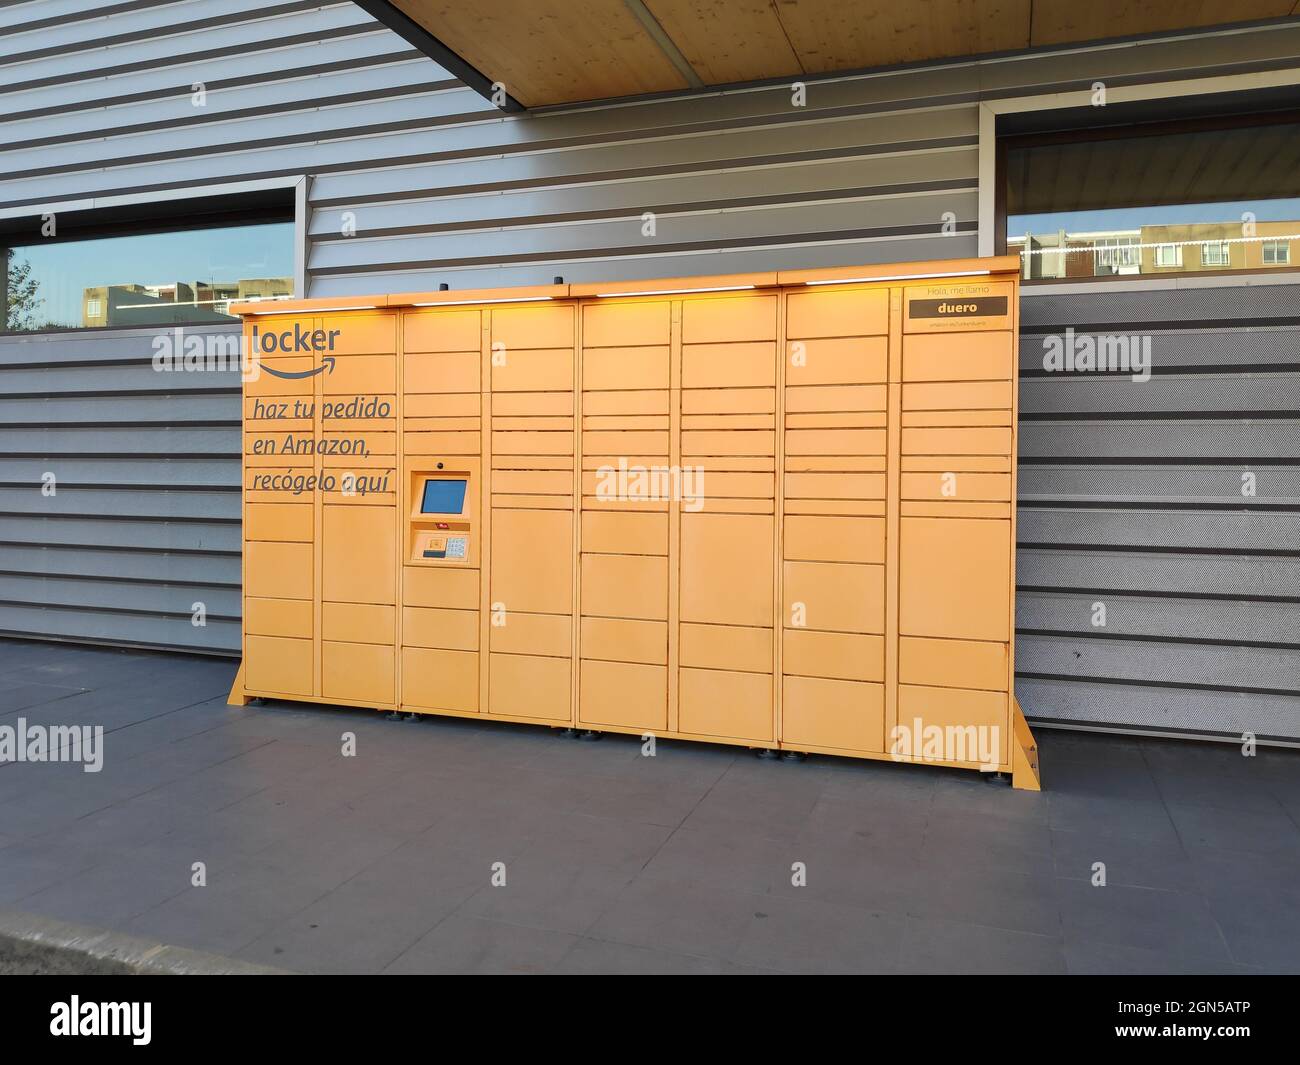 PLASENCIA, SPAIN - Apr 20, 2021: An Amazon locker that Amazon customers can use as a pick up point for mail ordered products at the entrance of a popu Stock Photo